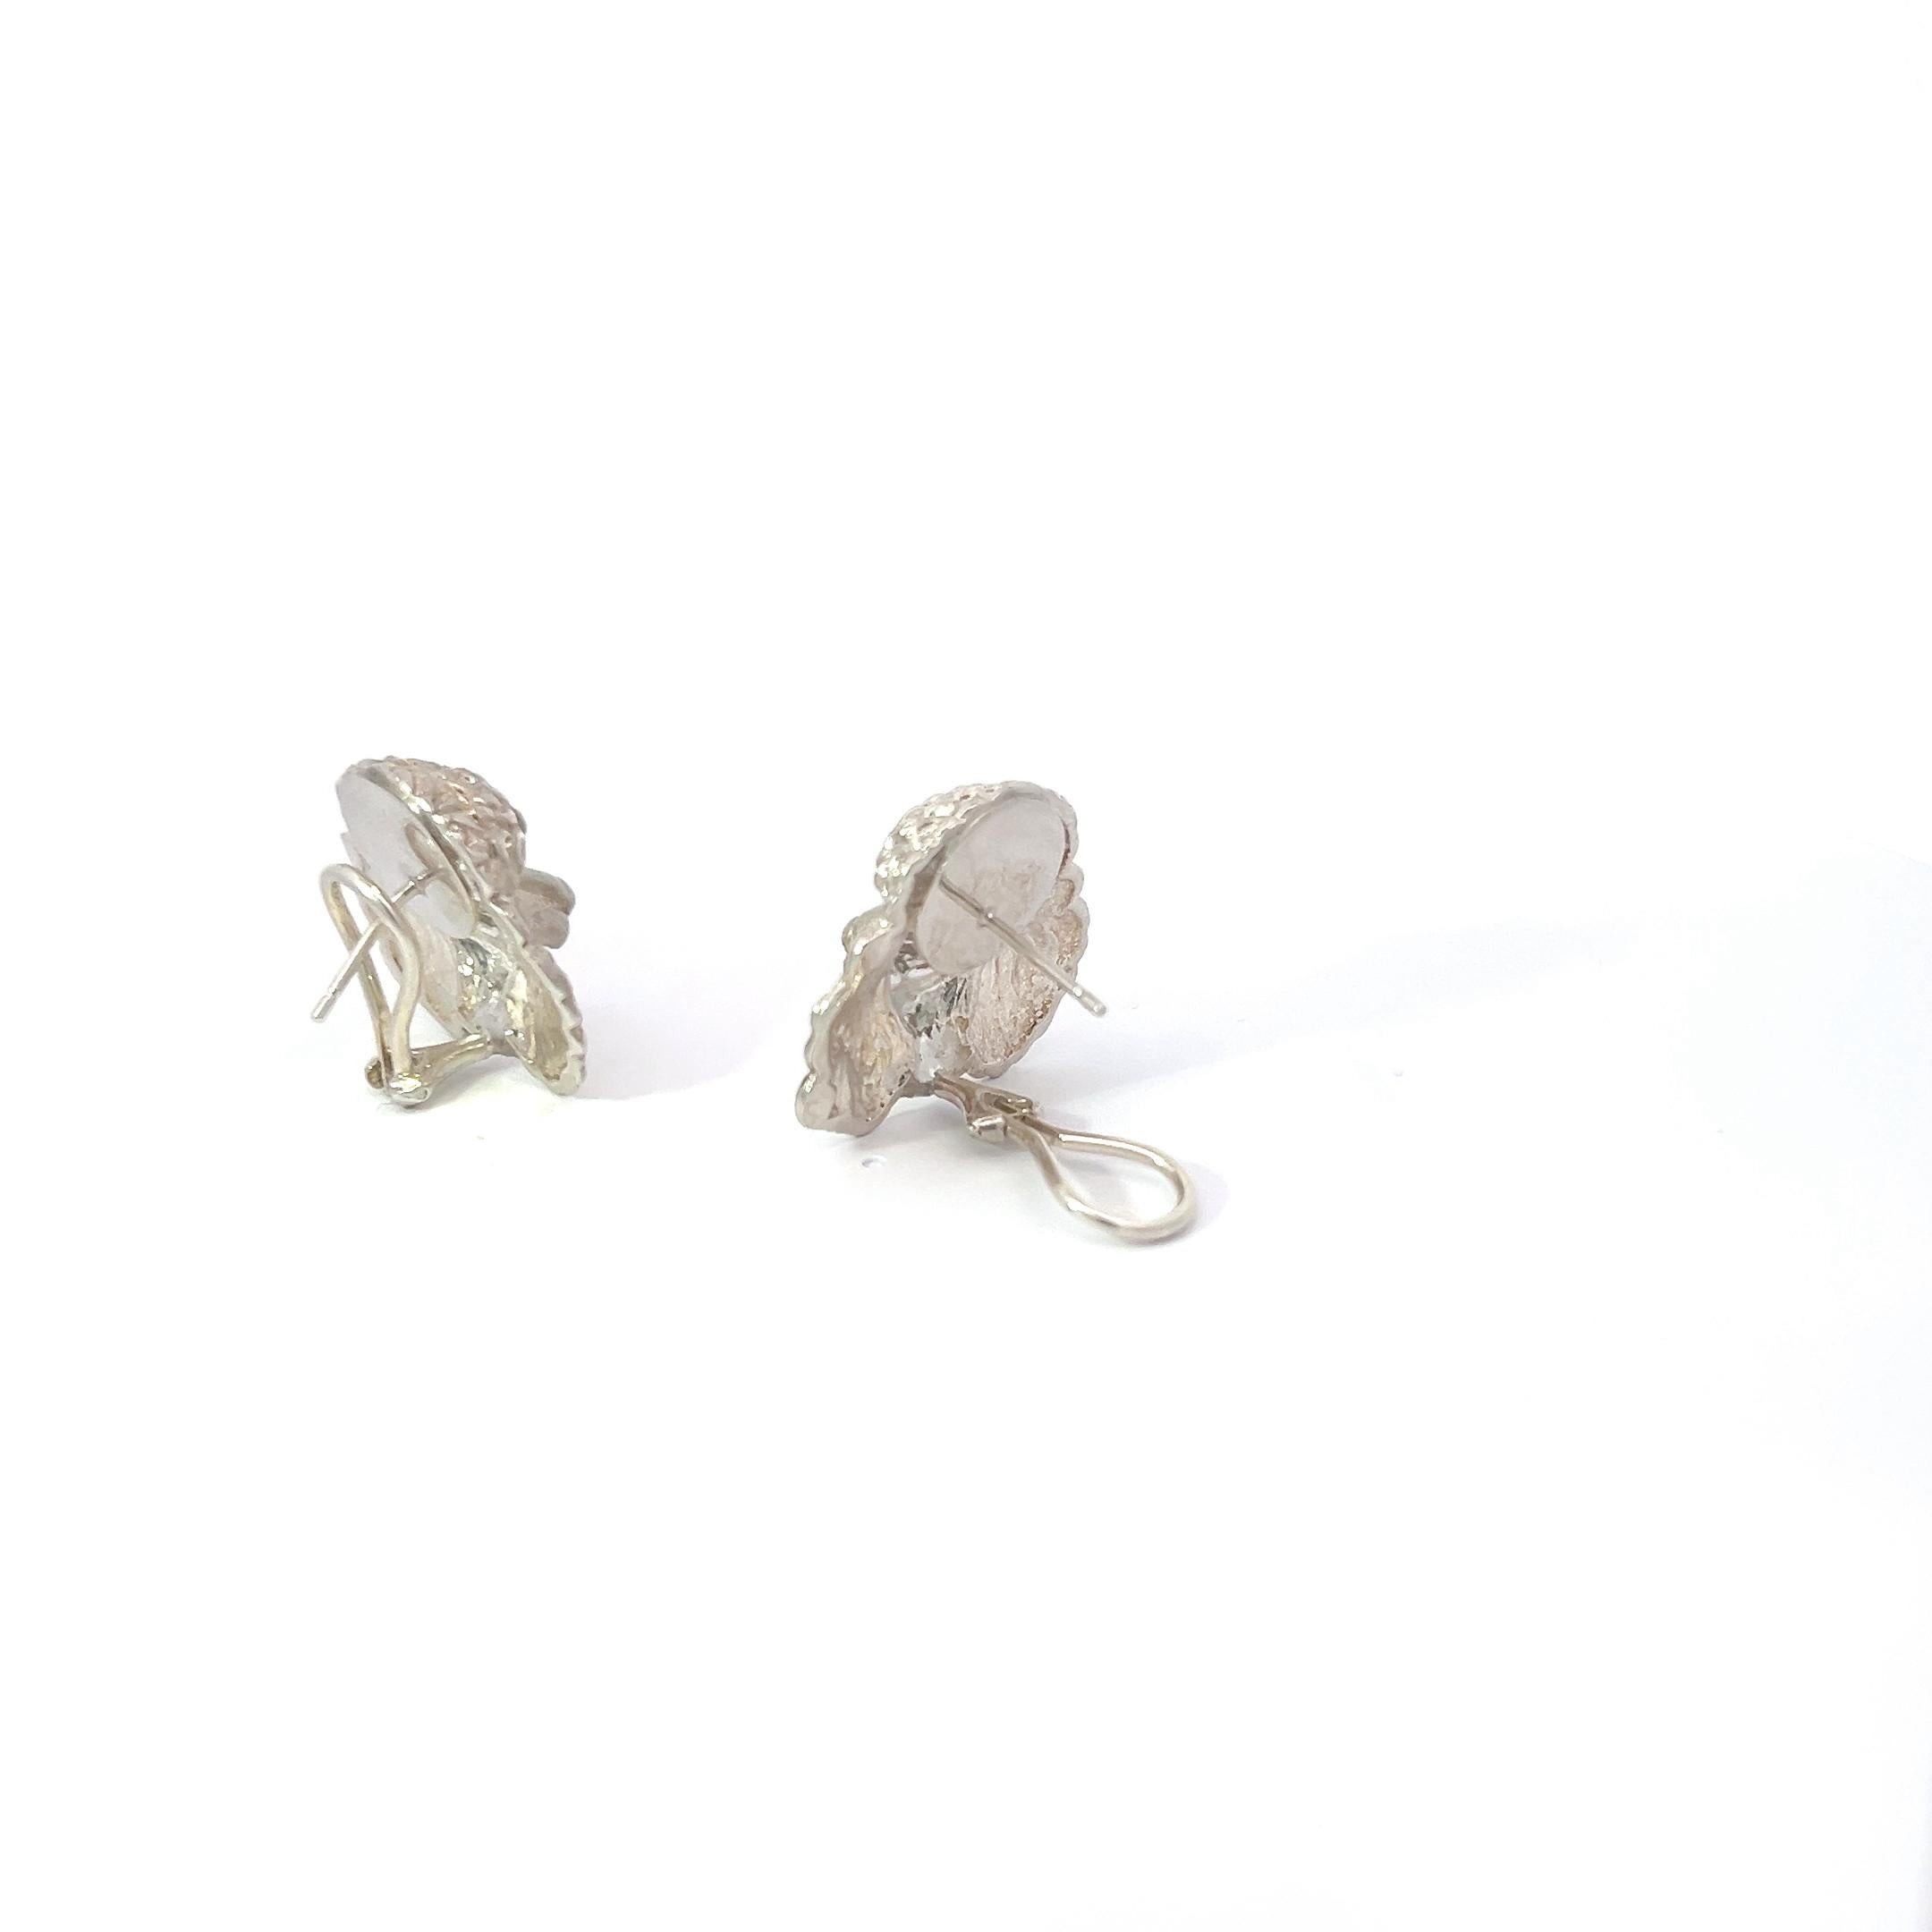 Infuse whimsical charm into your style with our Sterling Silver Puddle Dog Clip-On Earrings, a delightful expression of playful elegance. Crafted with precision, these earrings feature endearing puddle dog motifs cast in lustrous sterling silver,